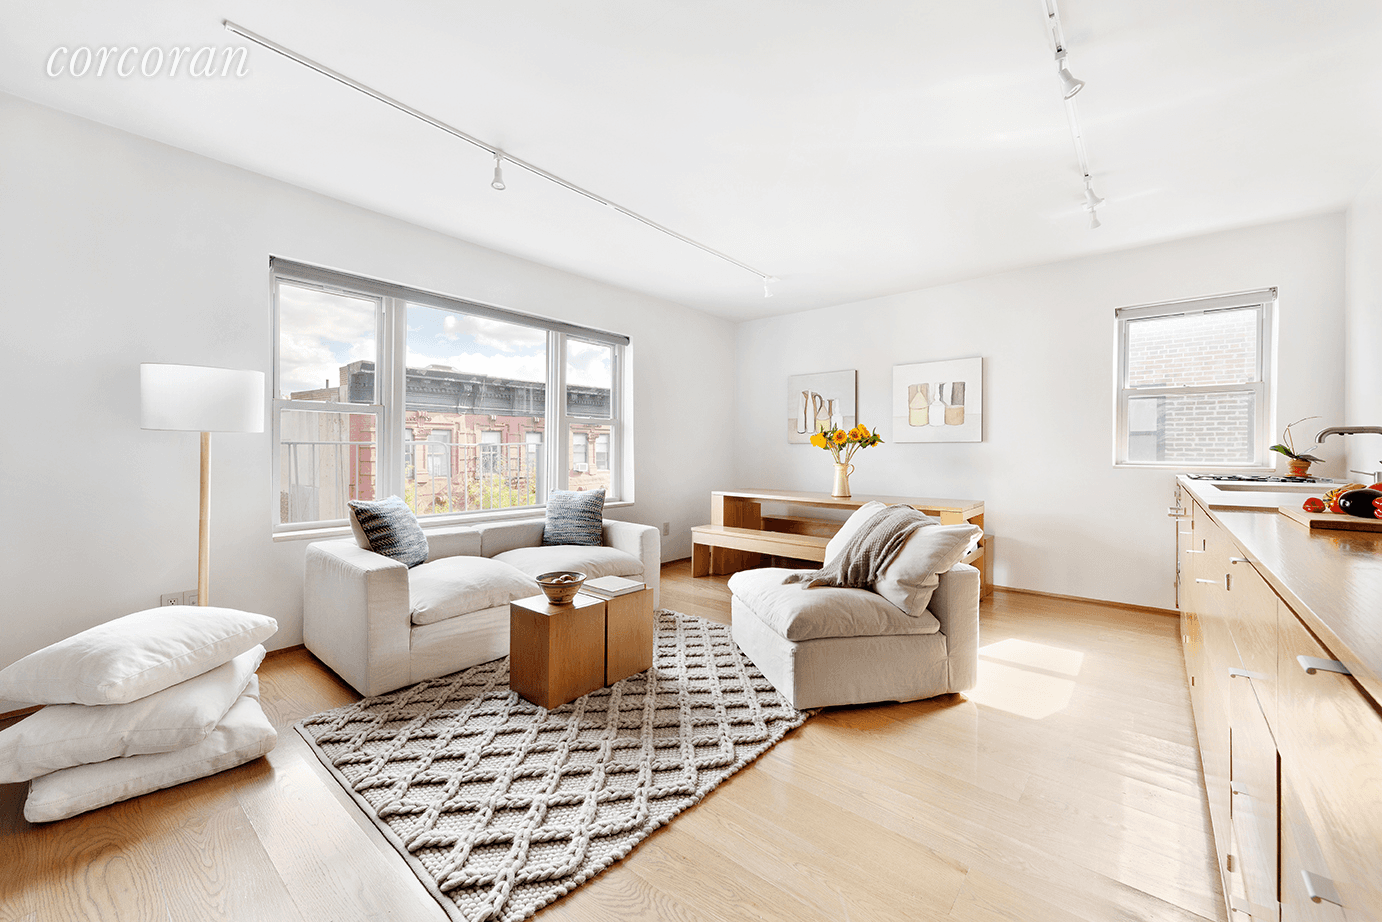 Perched on the top floor of a coop on one of SoHo's most charming blocks is this architecturally stunning apartment boasting three exposures, city views, and abundant natural light.